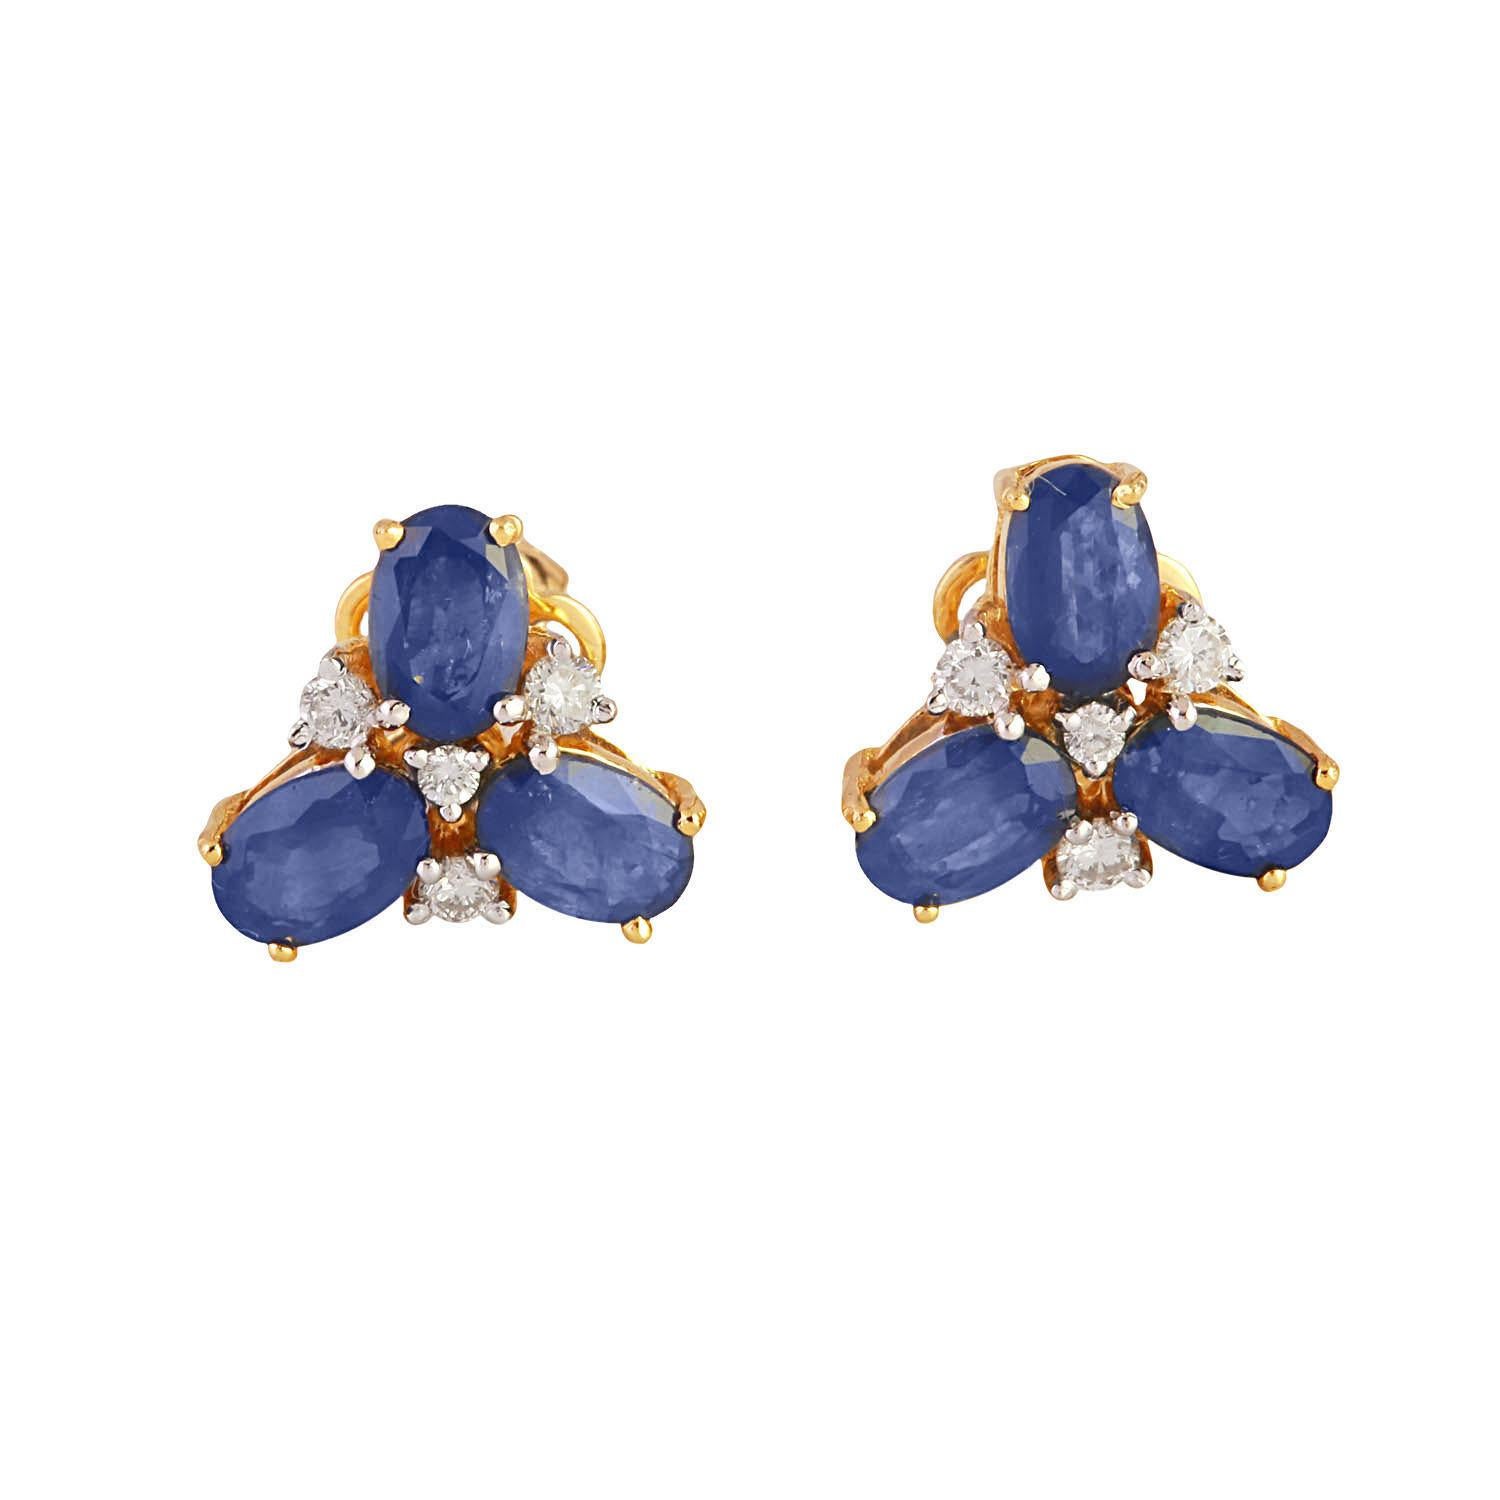 These earrings are made with sapphire gemstone and 18k yellow gold. It is so Casual and elegant. it is perfect for any occasion.

Specifications:

Dimensions: 11*12 MM
Gross Weight: 3.790 gms
Gold Weight: 3.082 gms
Gold Purity: 14k Yellow